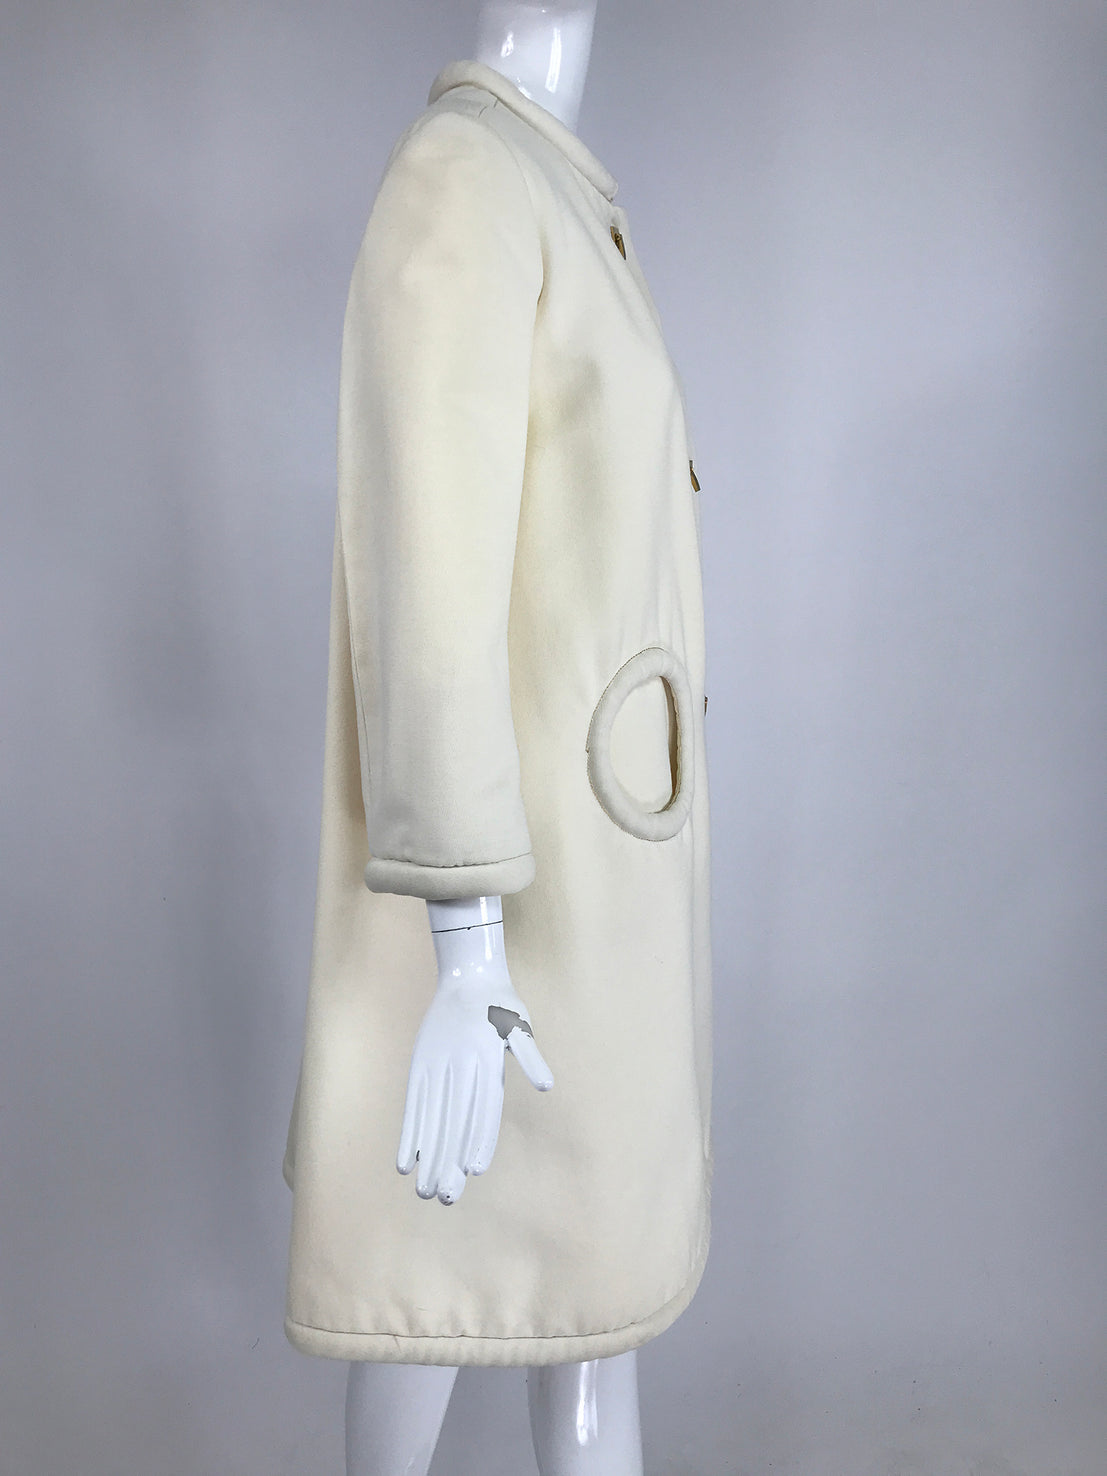 Cardin Palm Metal Clasps Pierre with – Vintage Circl Off Toggle Beach 1960s White Wool Coat